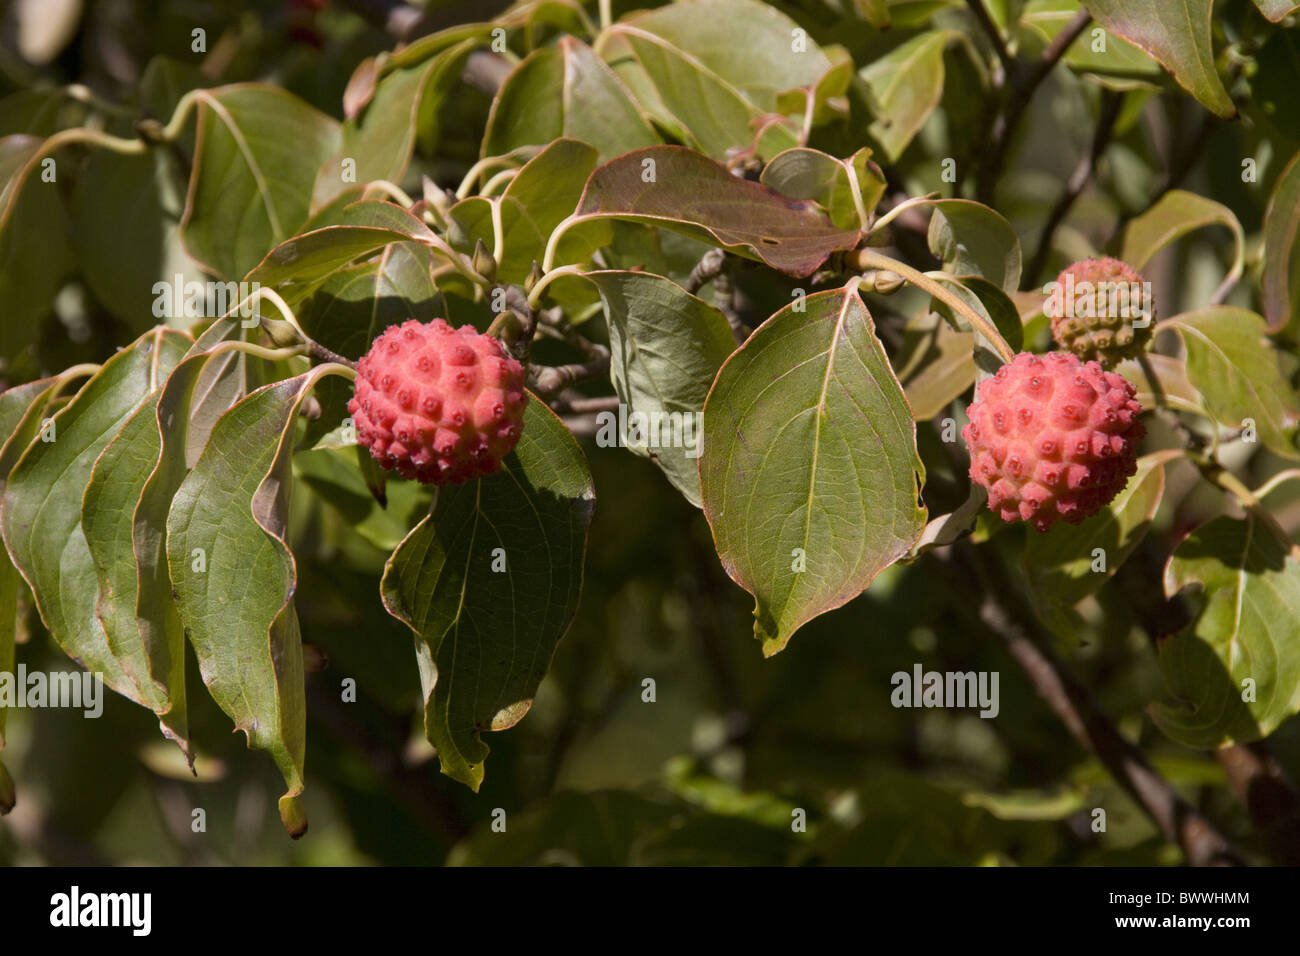 leaf and fruit of the Japanese cornal tree Stock Photo